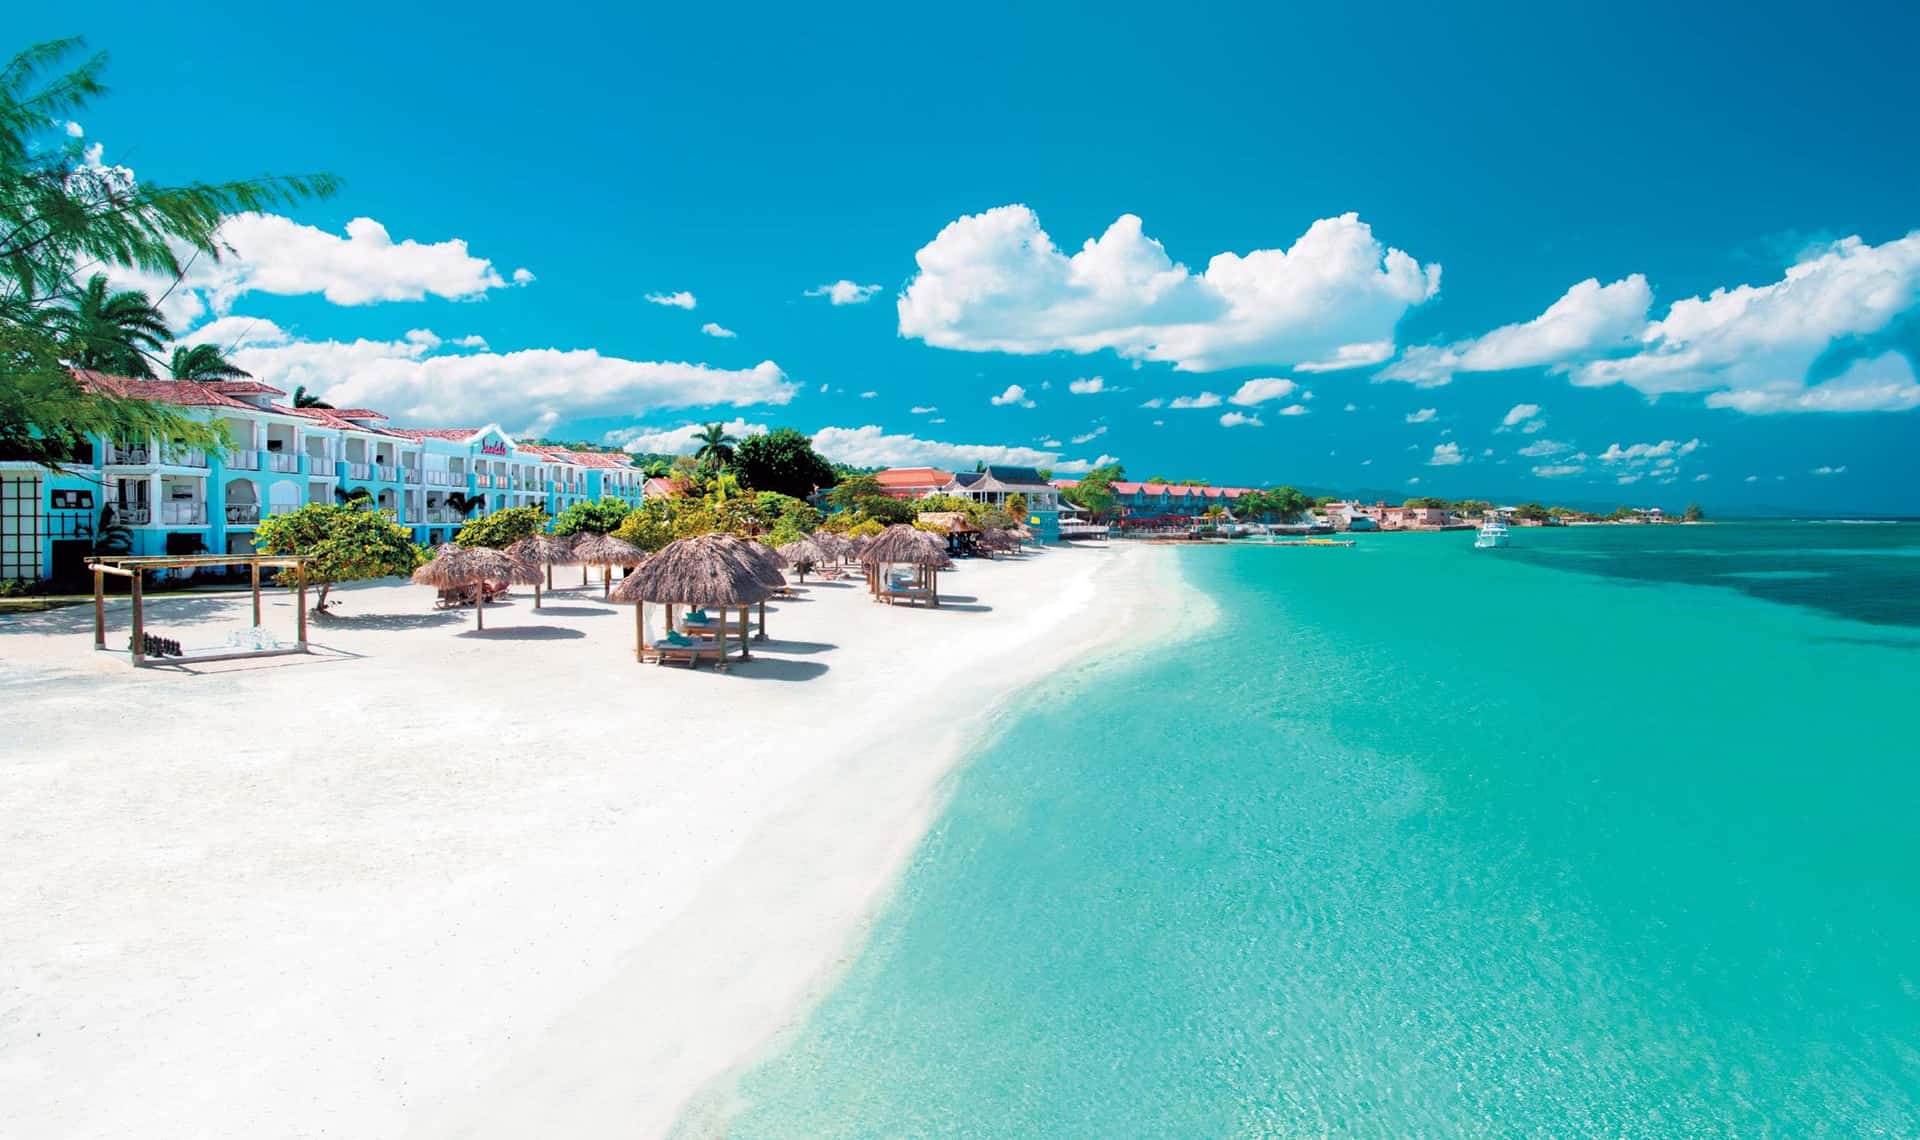 Best Beaches In Jamaica Montego Bay - Get More Anythink's